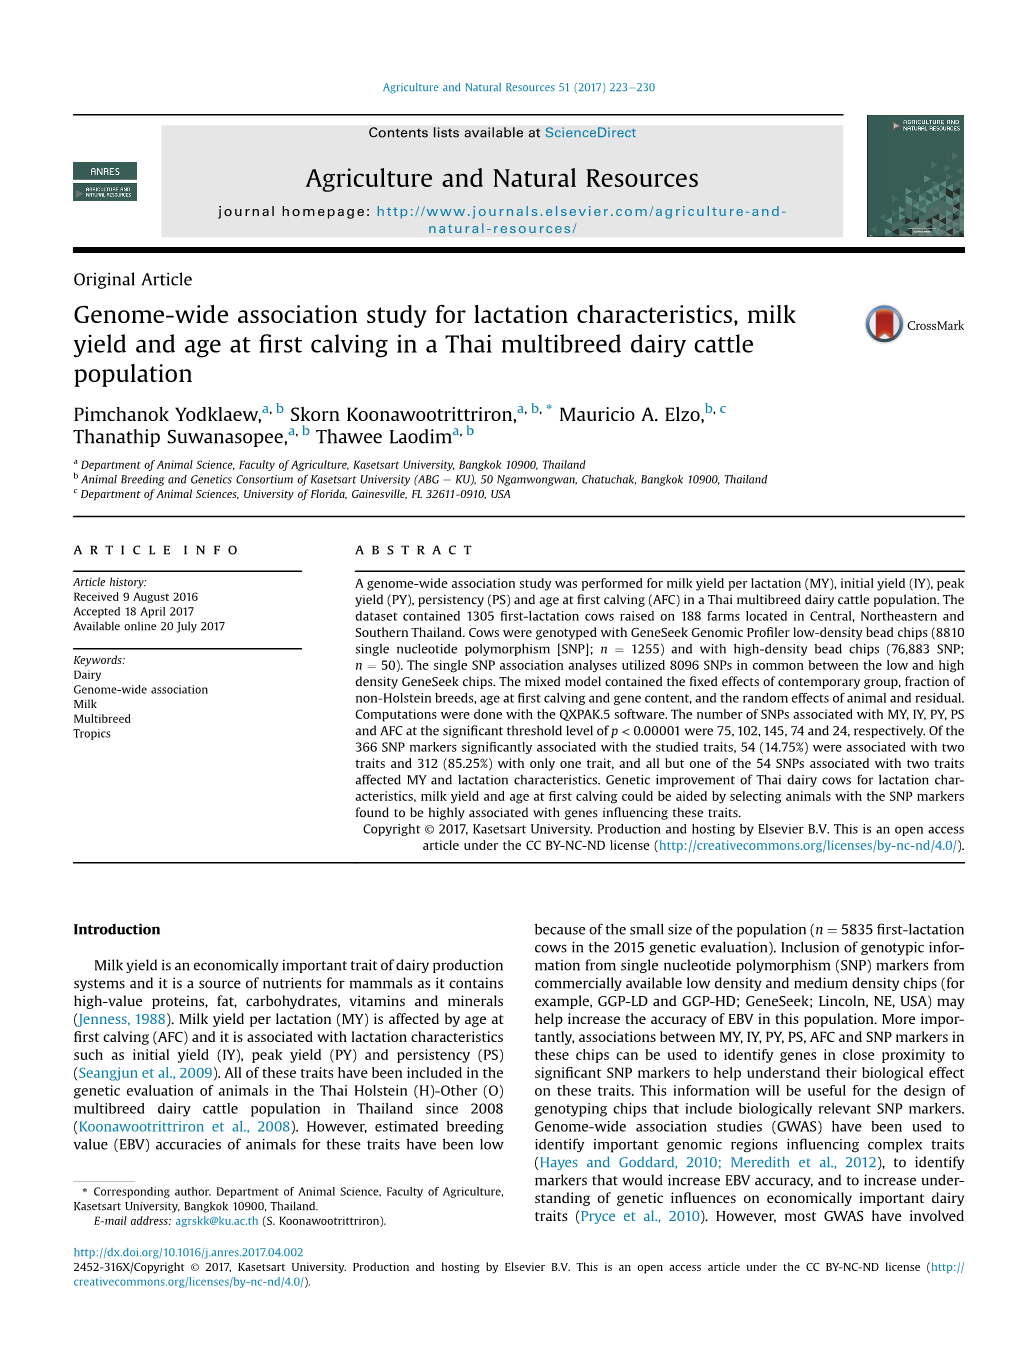 Genome-Wide Association Study for Lactation Characteristics, Milk Yield and Age at ﬁrst Calving in a Thai Multibreed Dairy Cattle Population